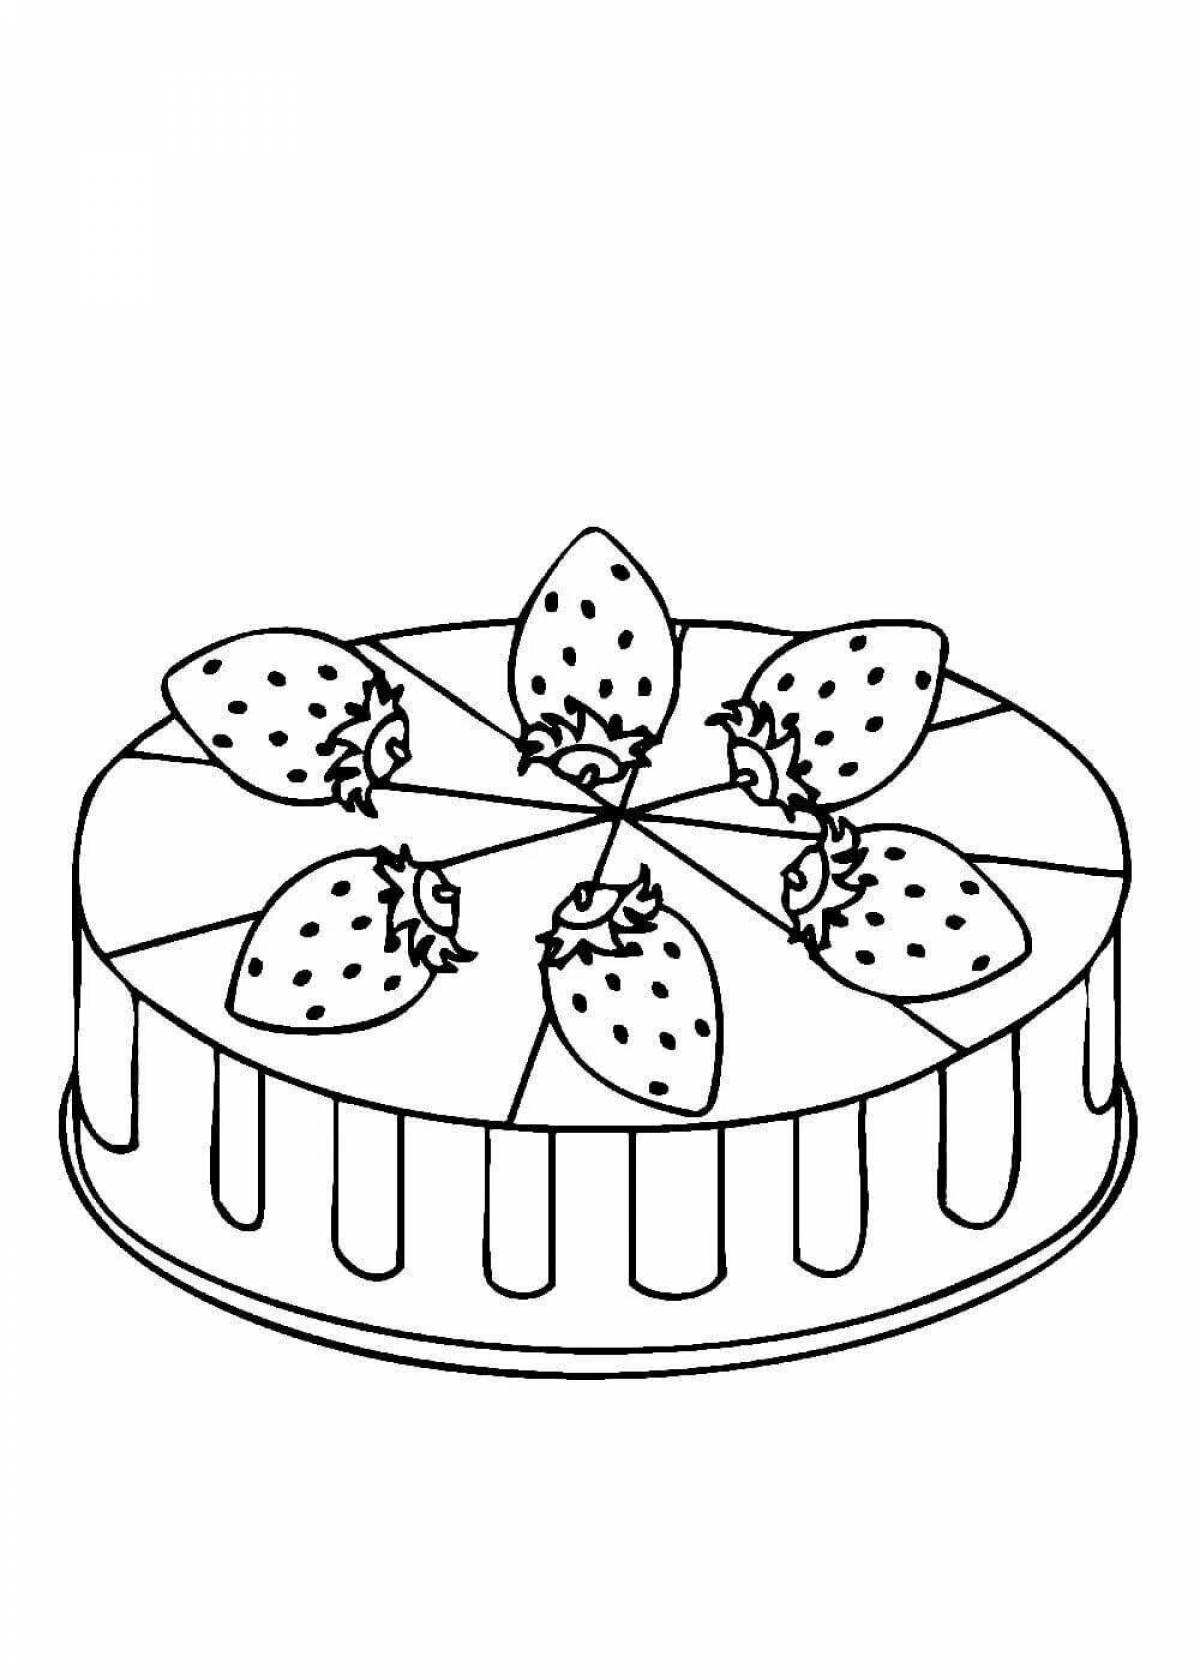 Chocolate cake coloring page